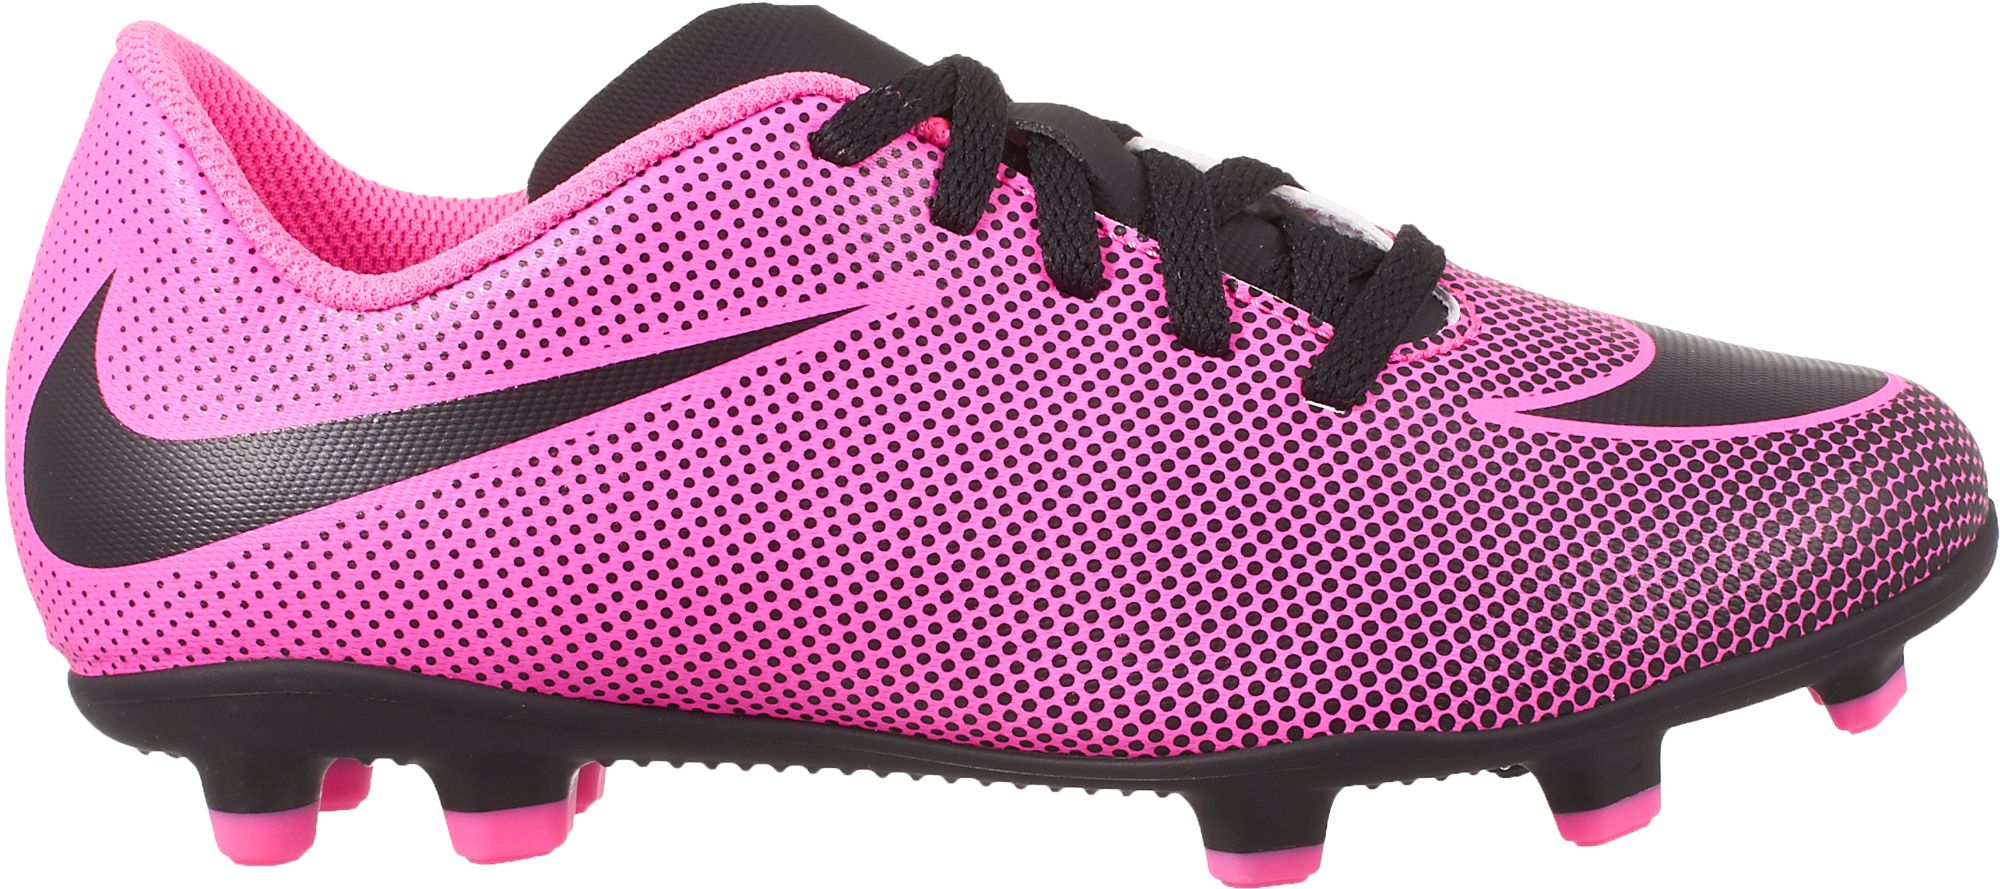 pink and black soccer cleats